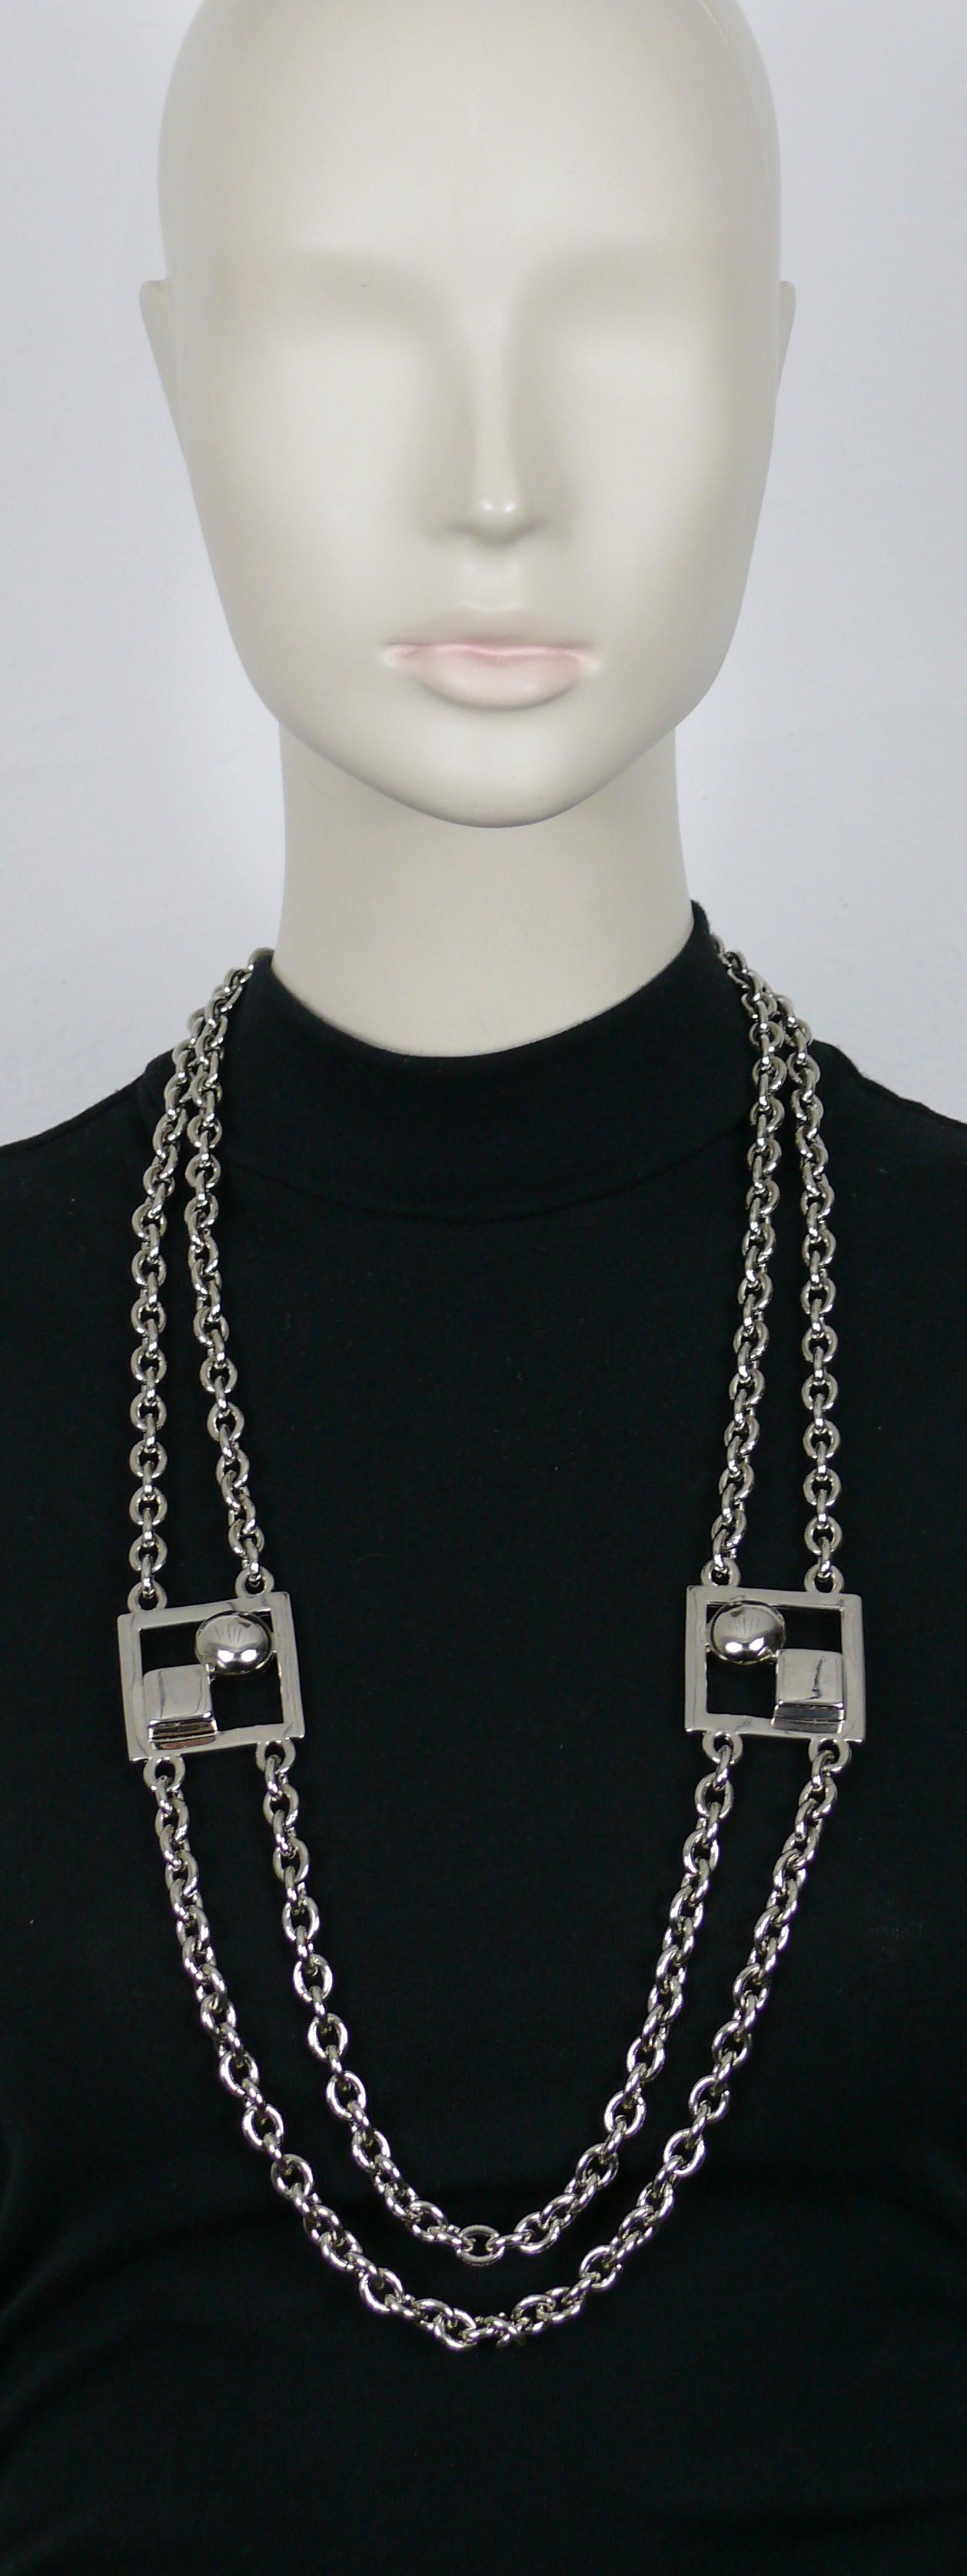 PACO RABANNE vintage silver tone double chain necklace featuring two large 3-dimensional modernist square links.

Lobster clasp closure.

Embossed PACO RABANNE.

Indicative measurements : length approx. 80.5 cm (31.69 inches) / modernist square